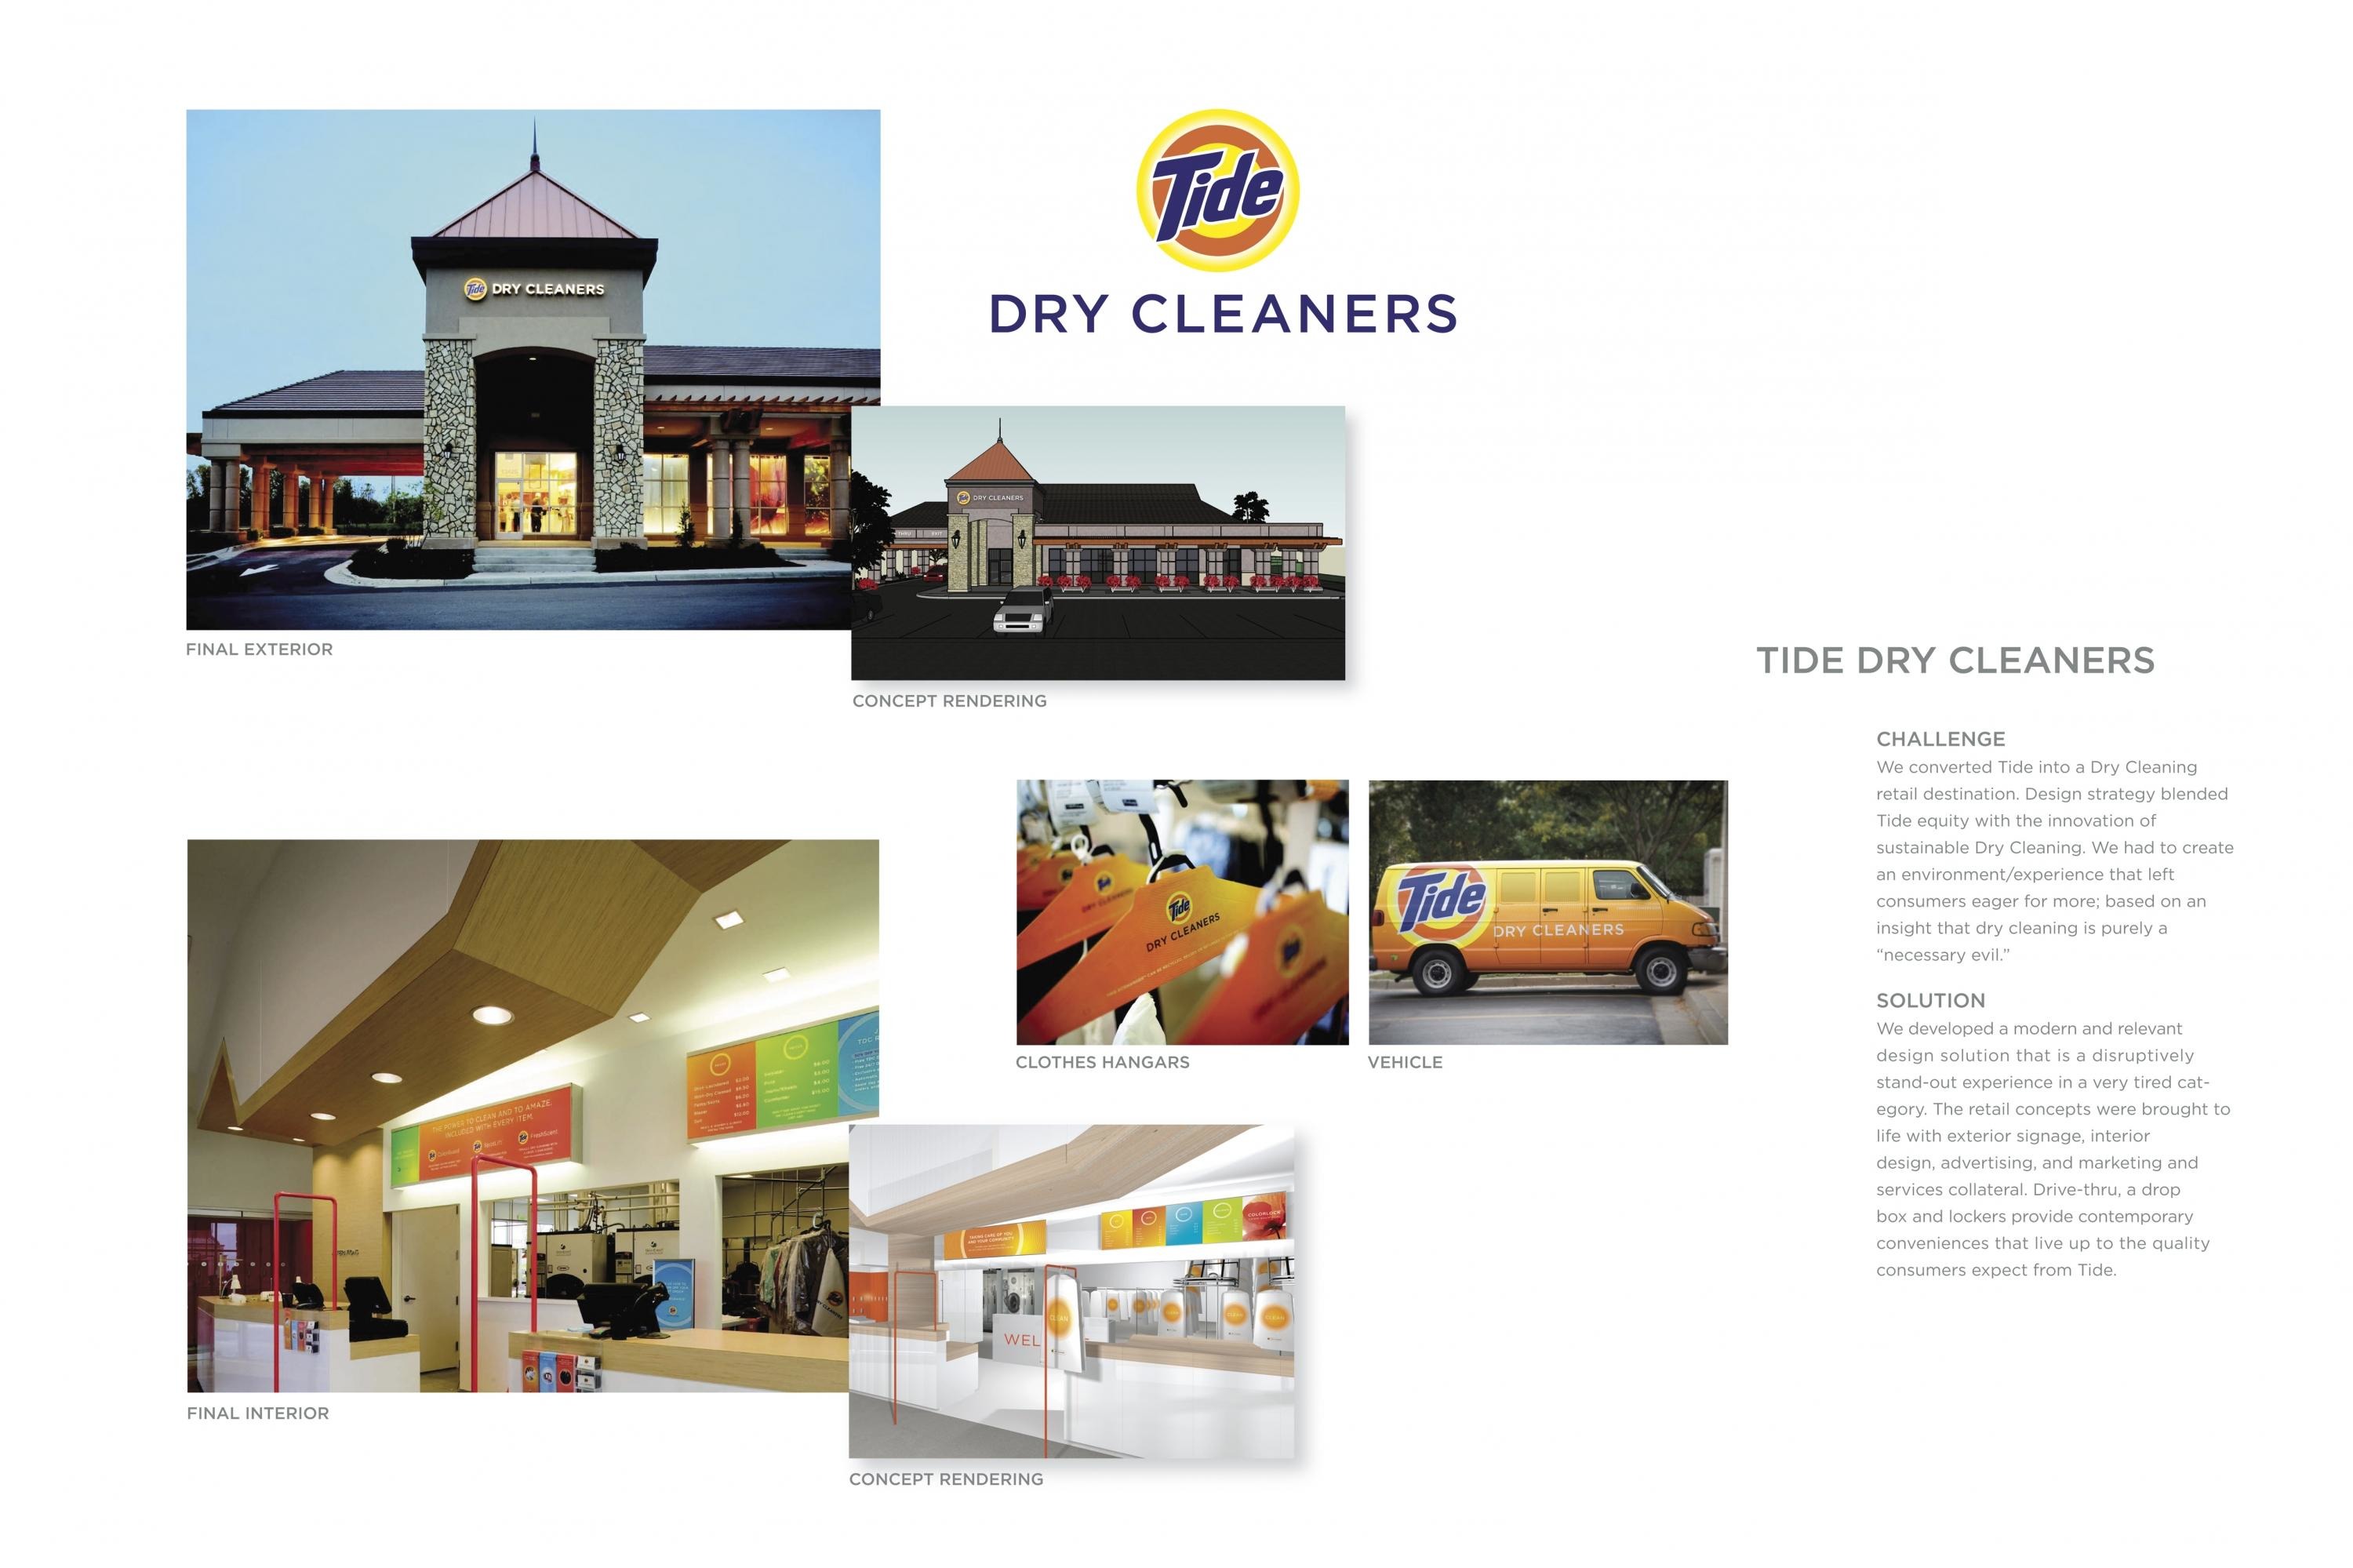 TIDE DRY CLEANERS